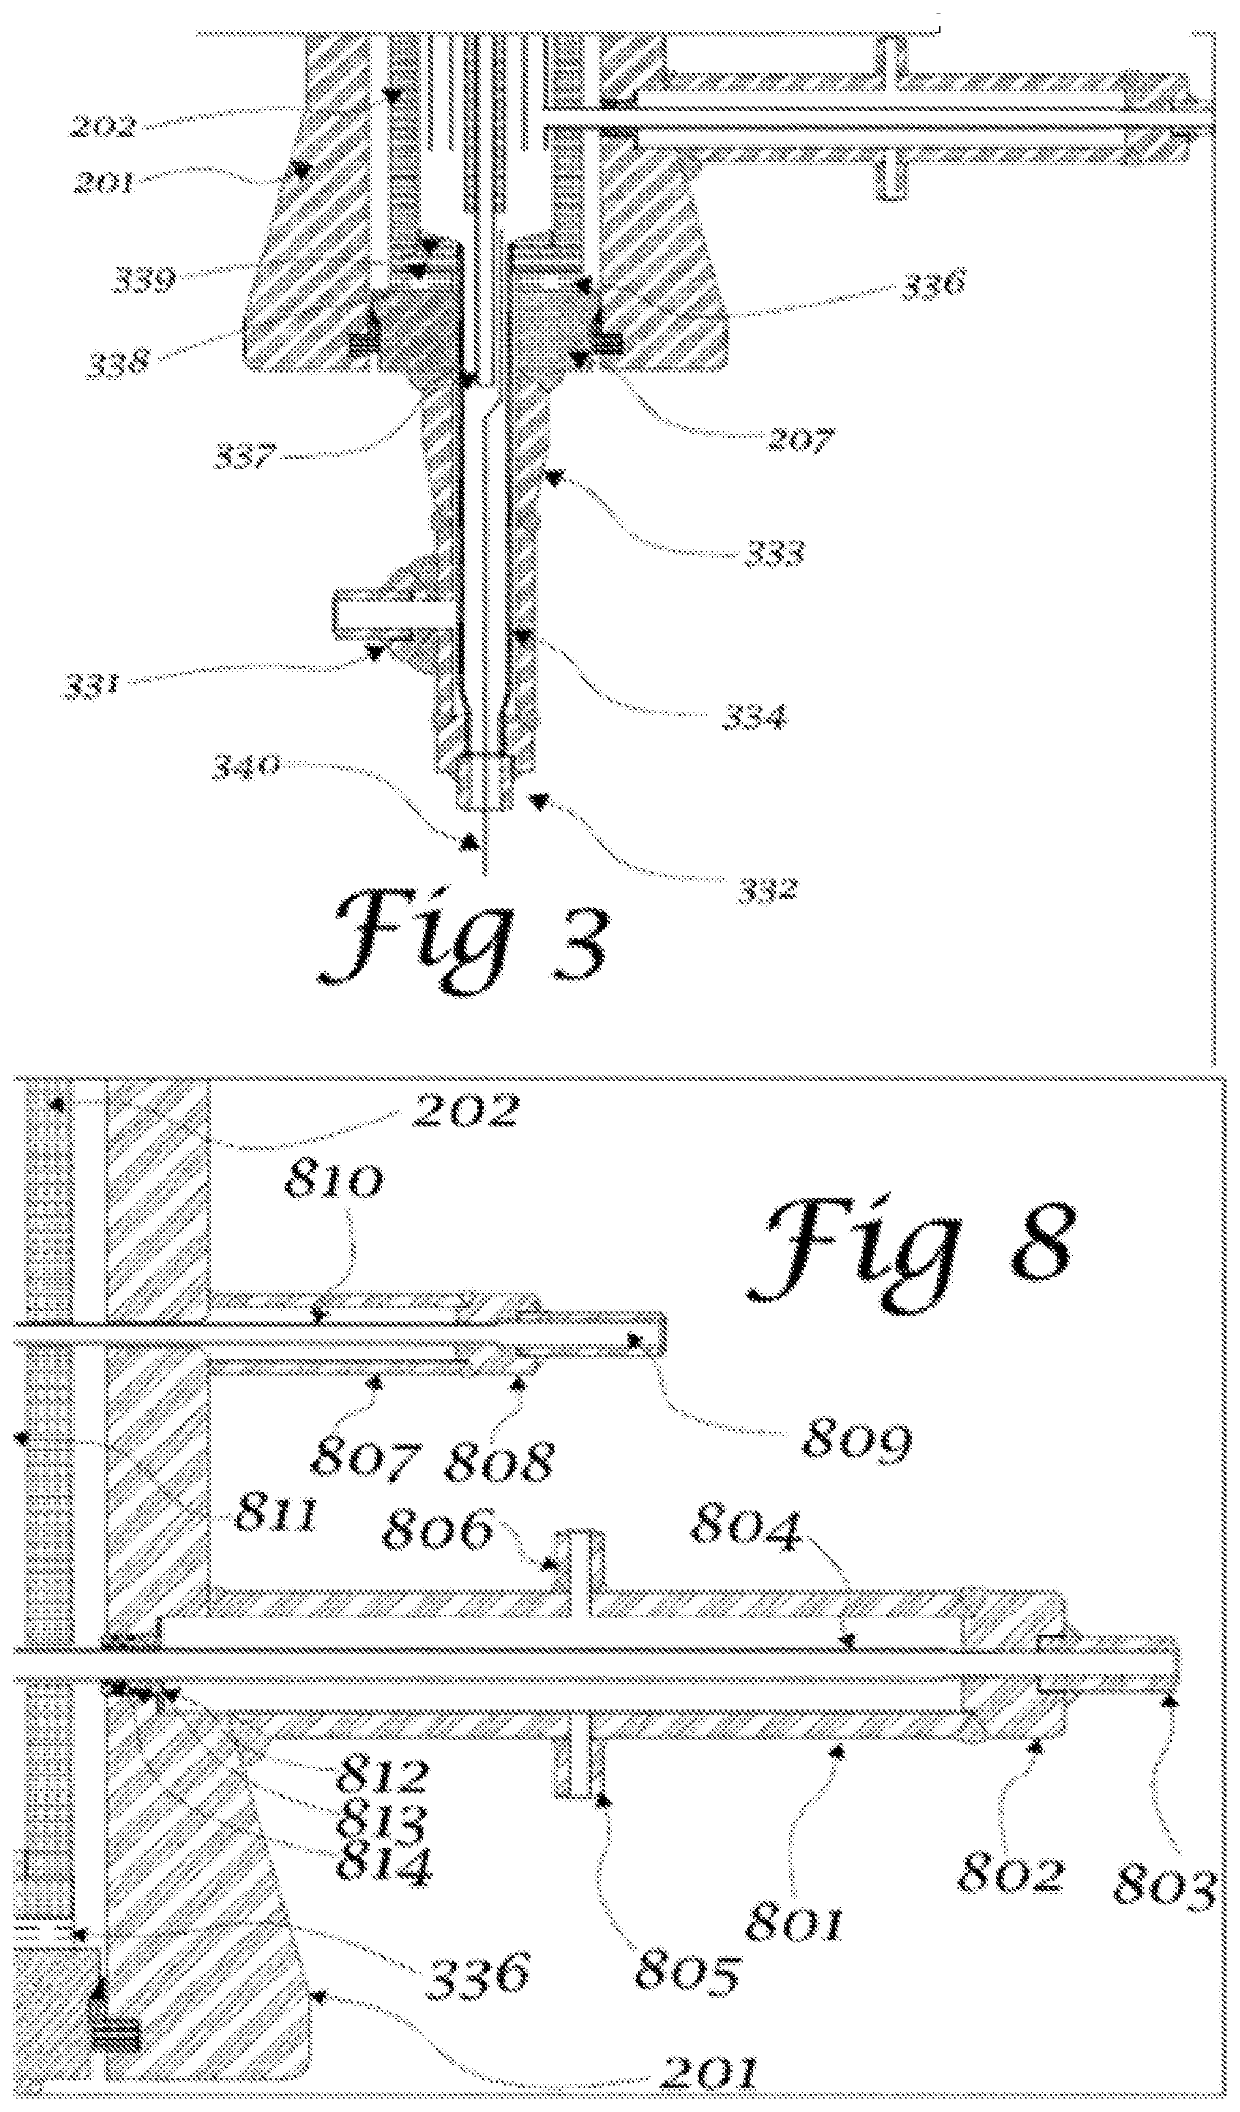 Apparatus for Supercritical Water Gasification